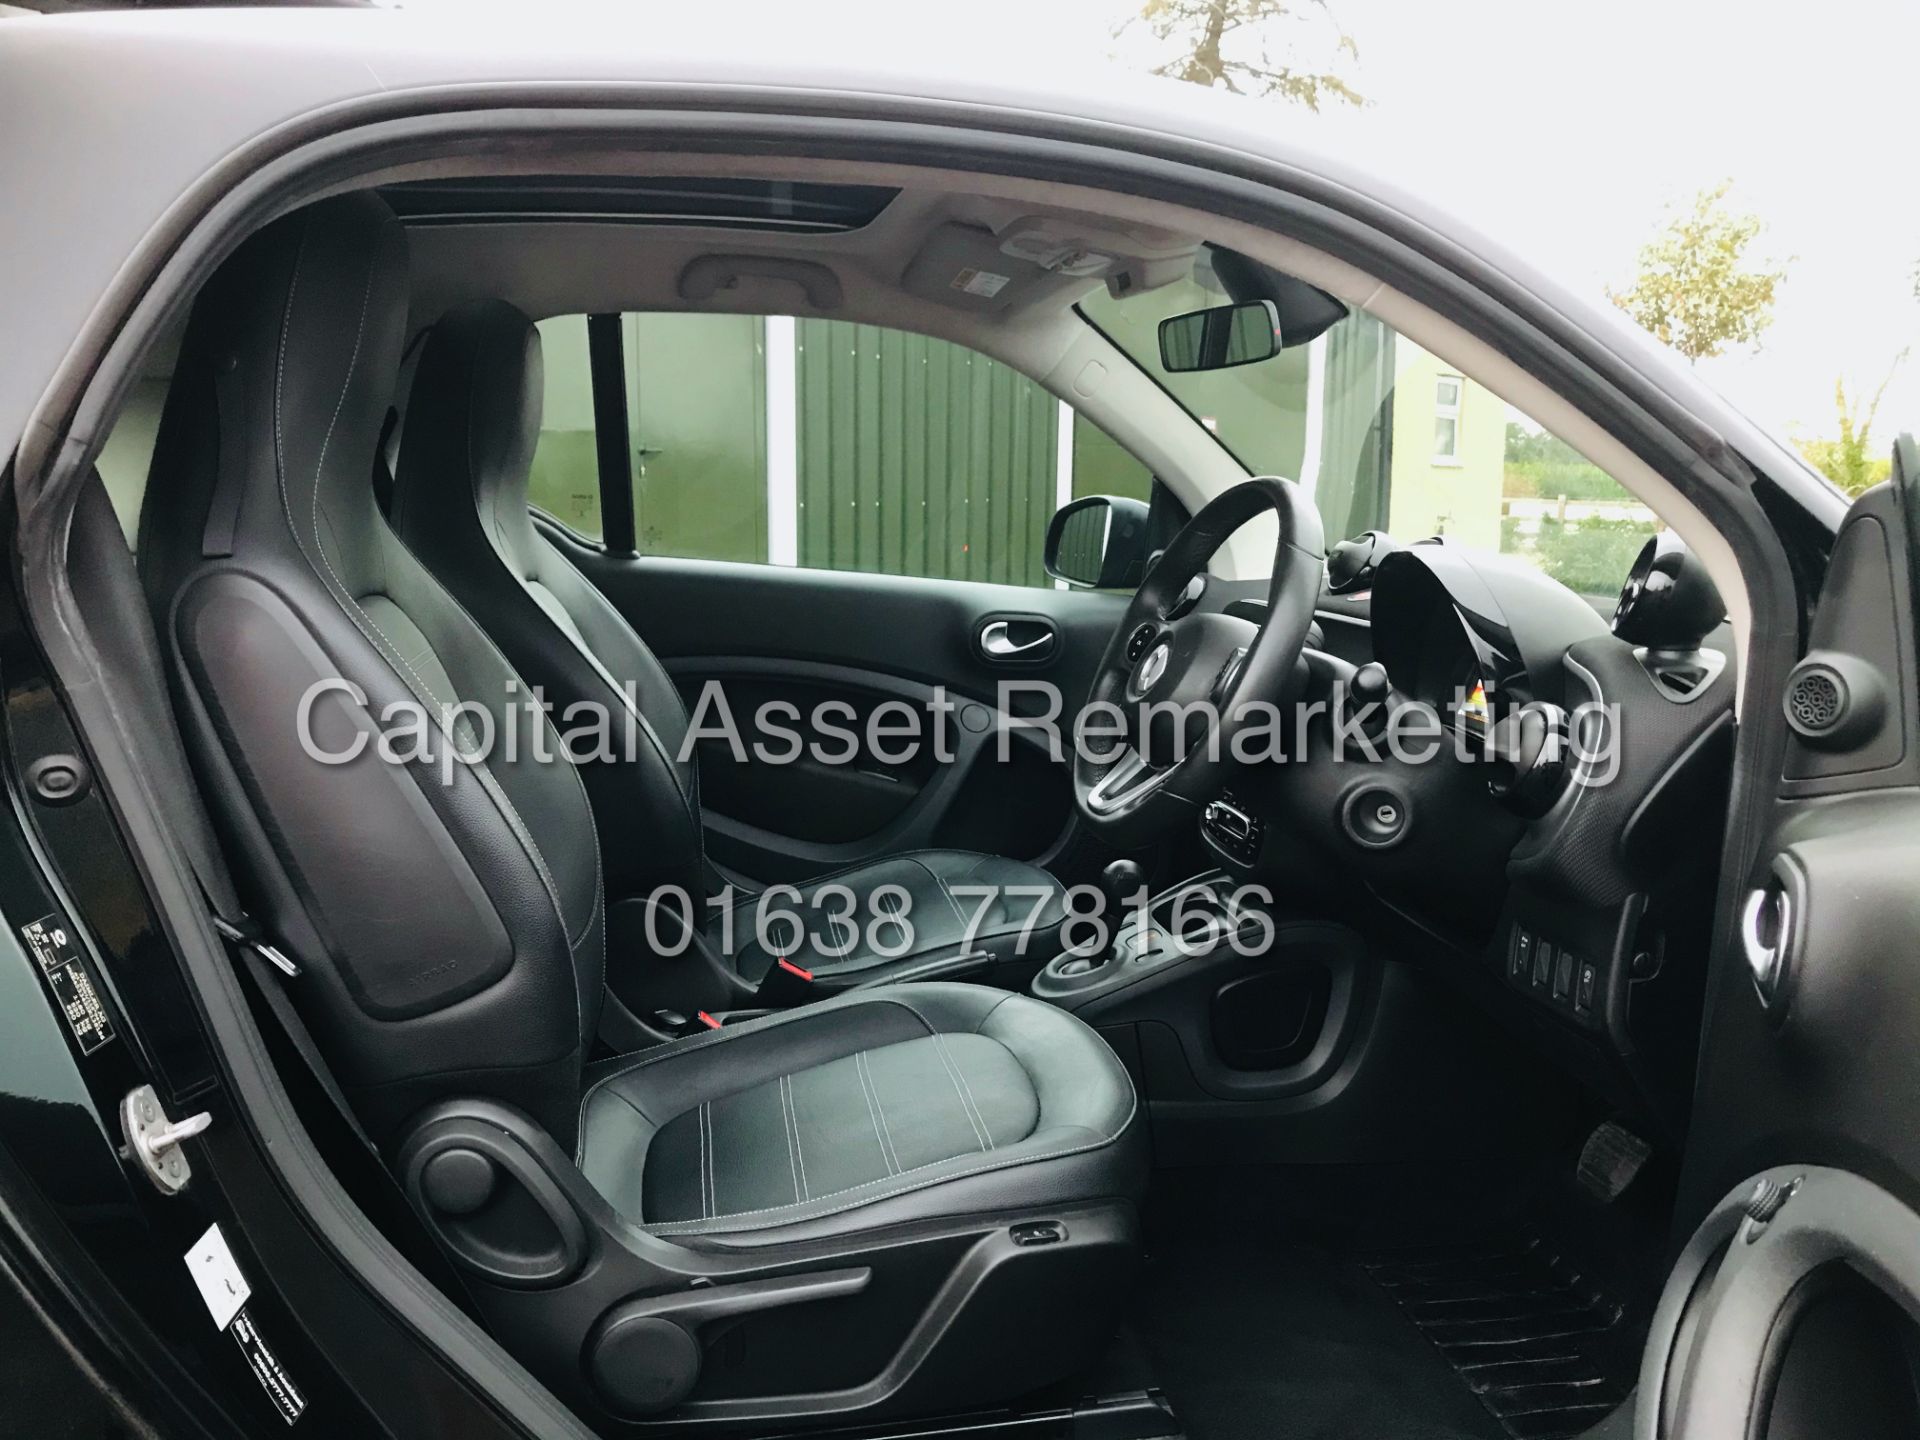 (ON SALE) SMART FORTWO PRIME "PREMIUM EDITION" 2017 REG - 1 KEEPER - LEATHER - PAN ROOF - HUGE SPEC - Image 8 of 20